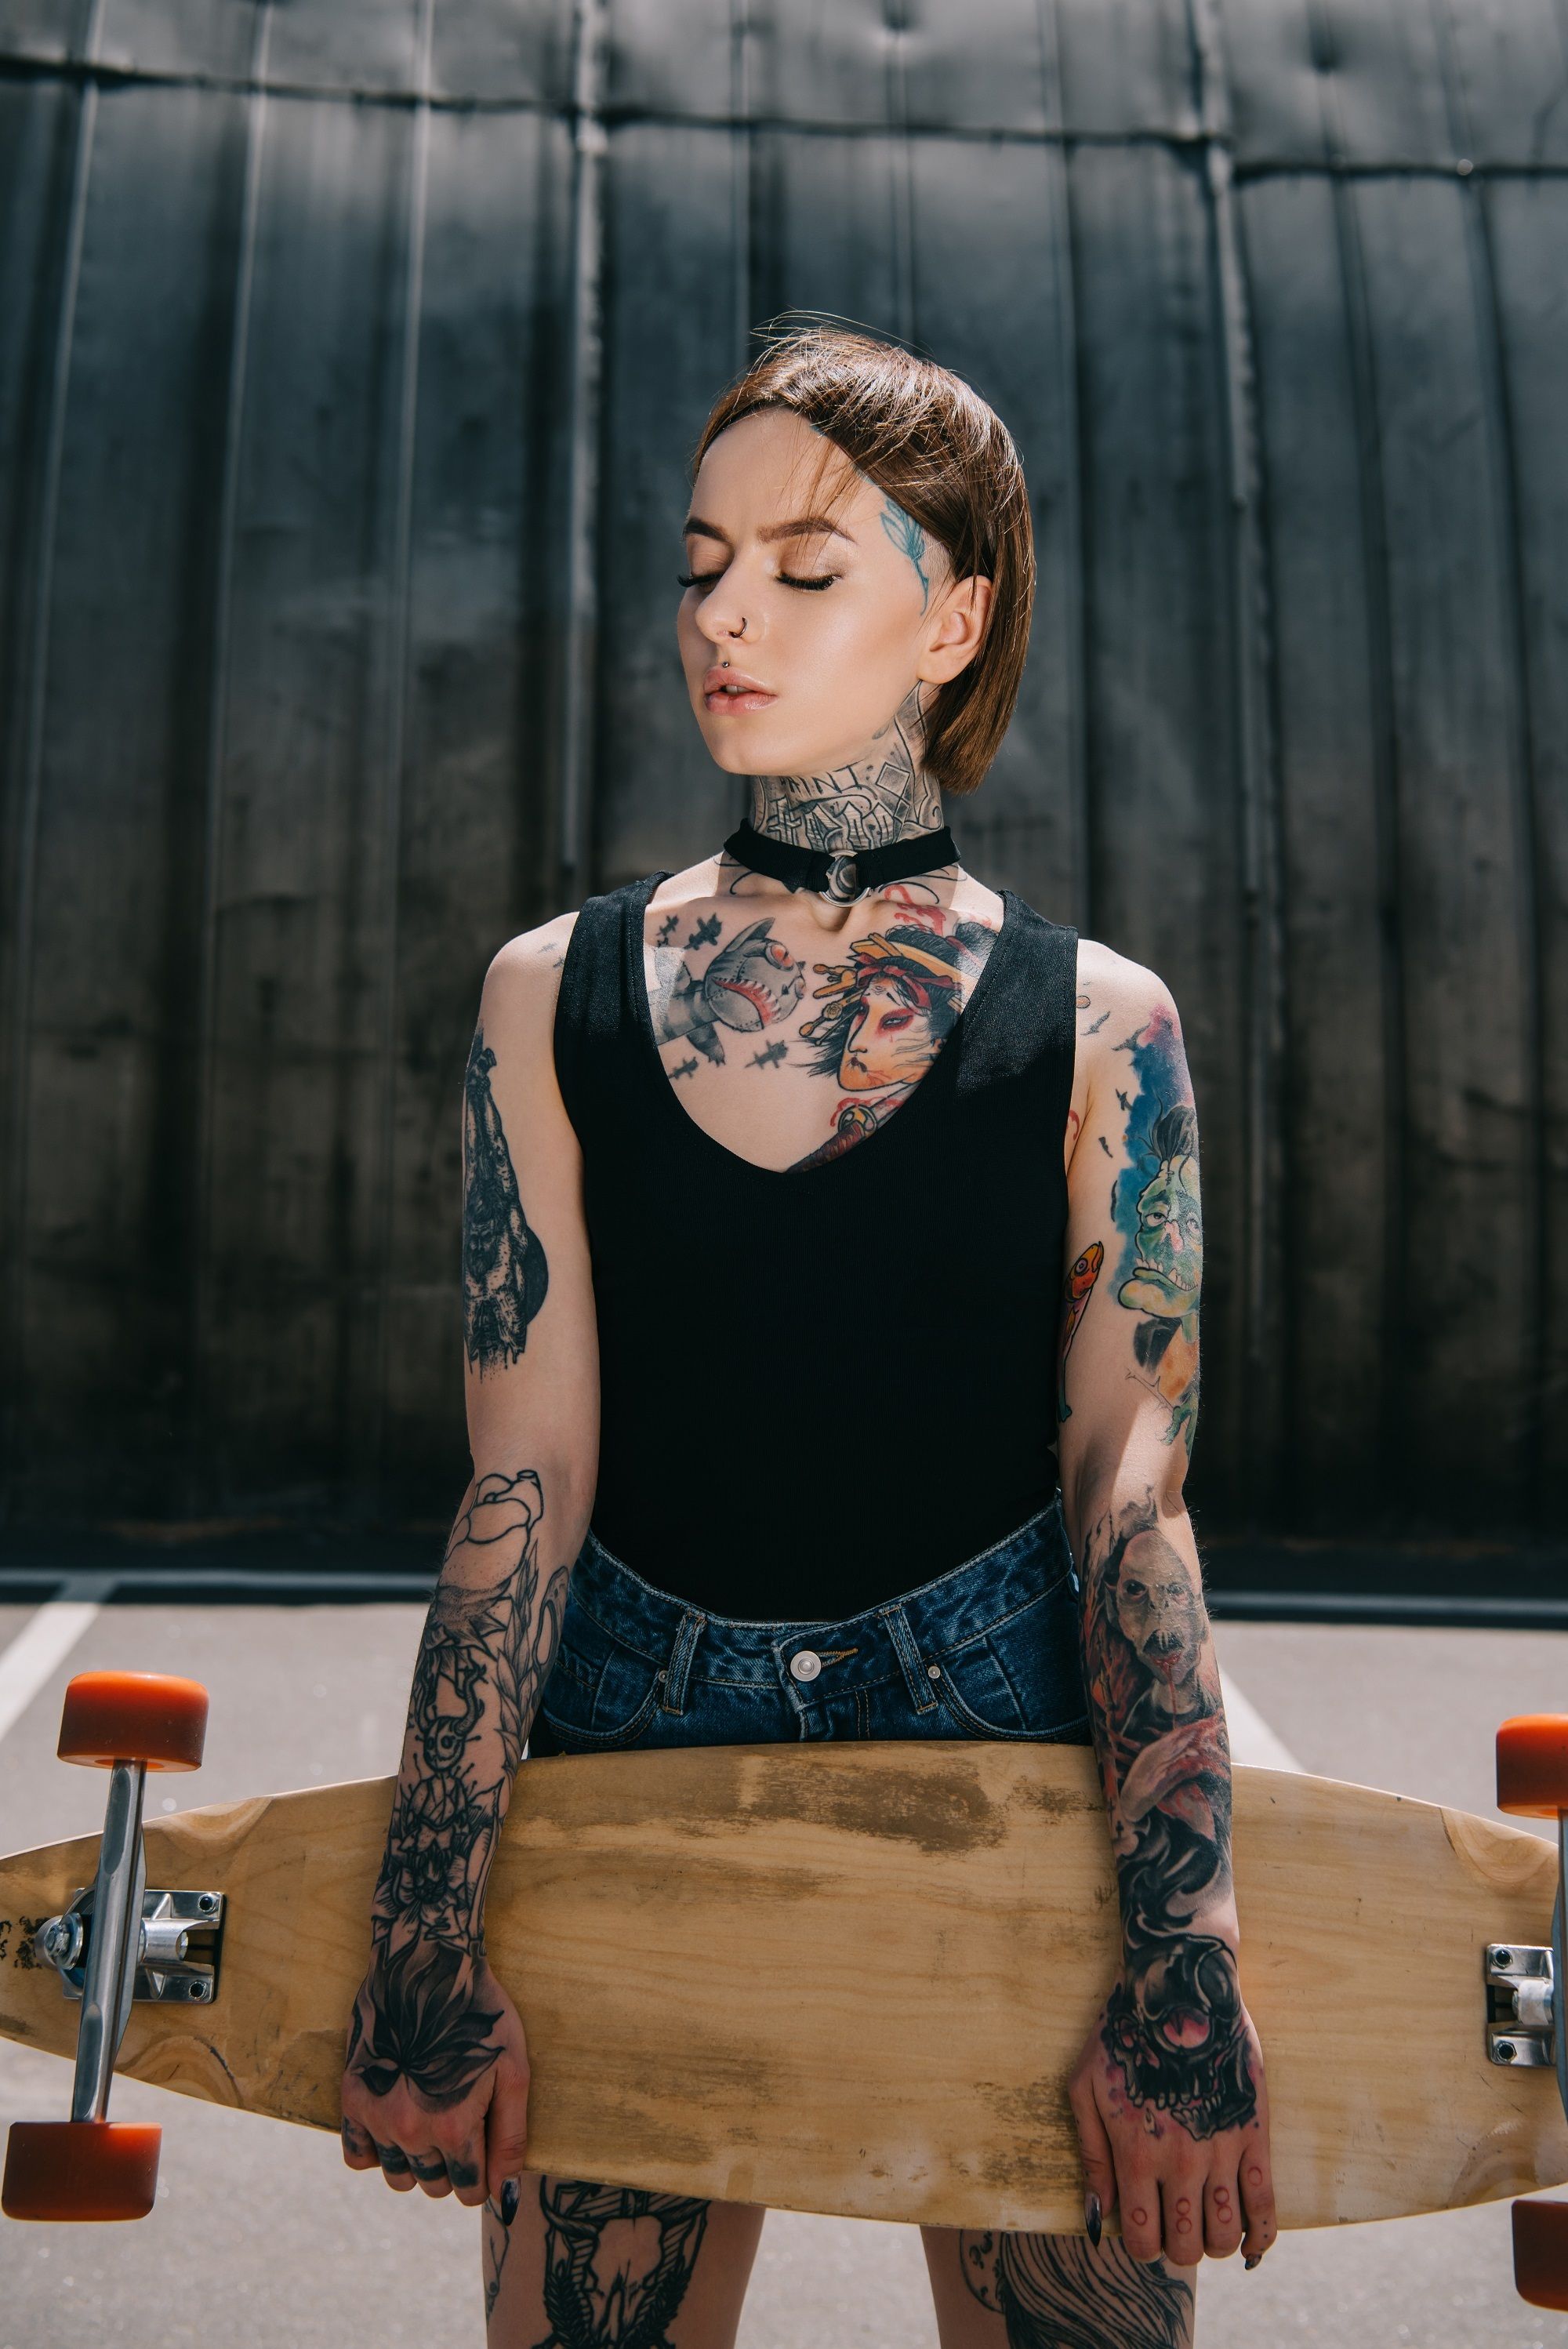 Hairstyles for skaters: Woman with slicked back bob and tattoos holding a skateboard